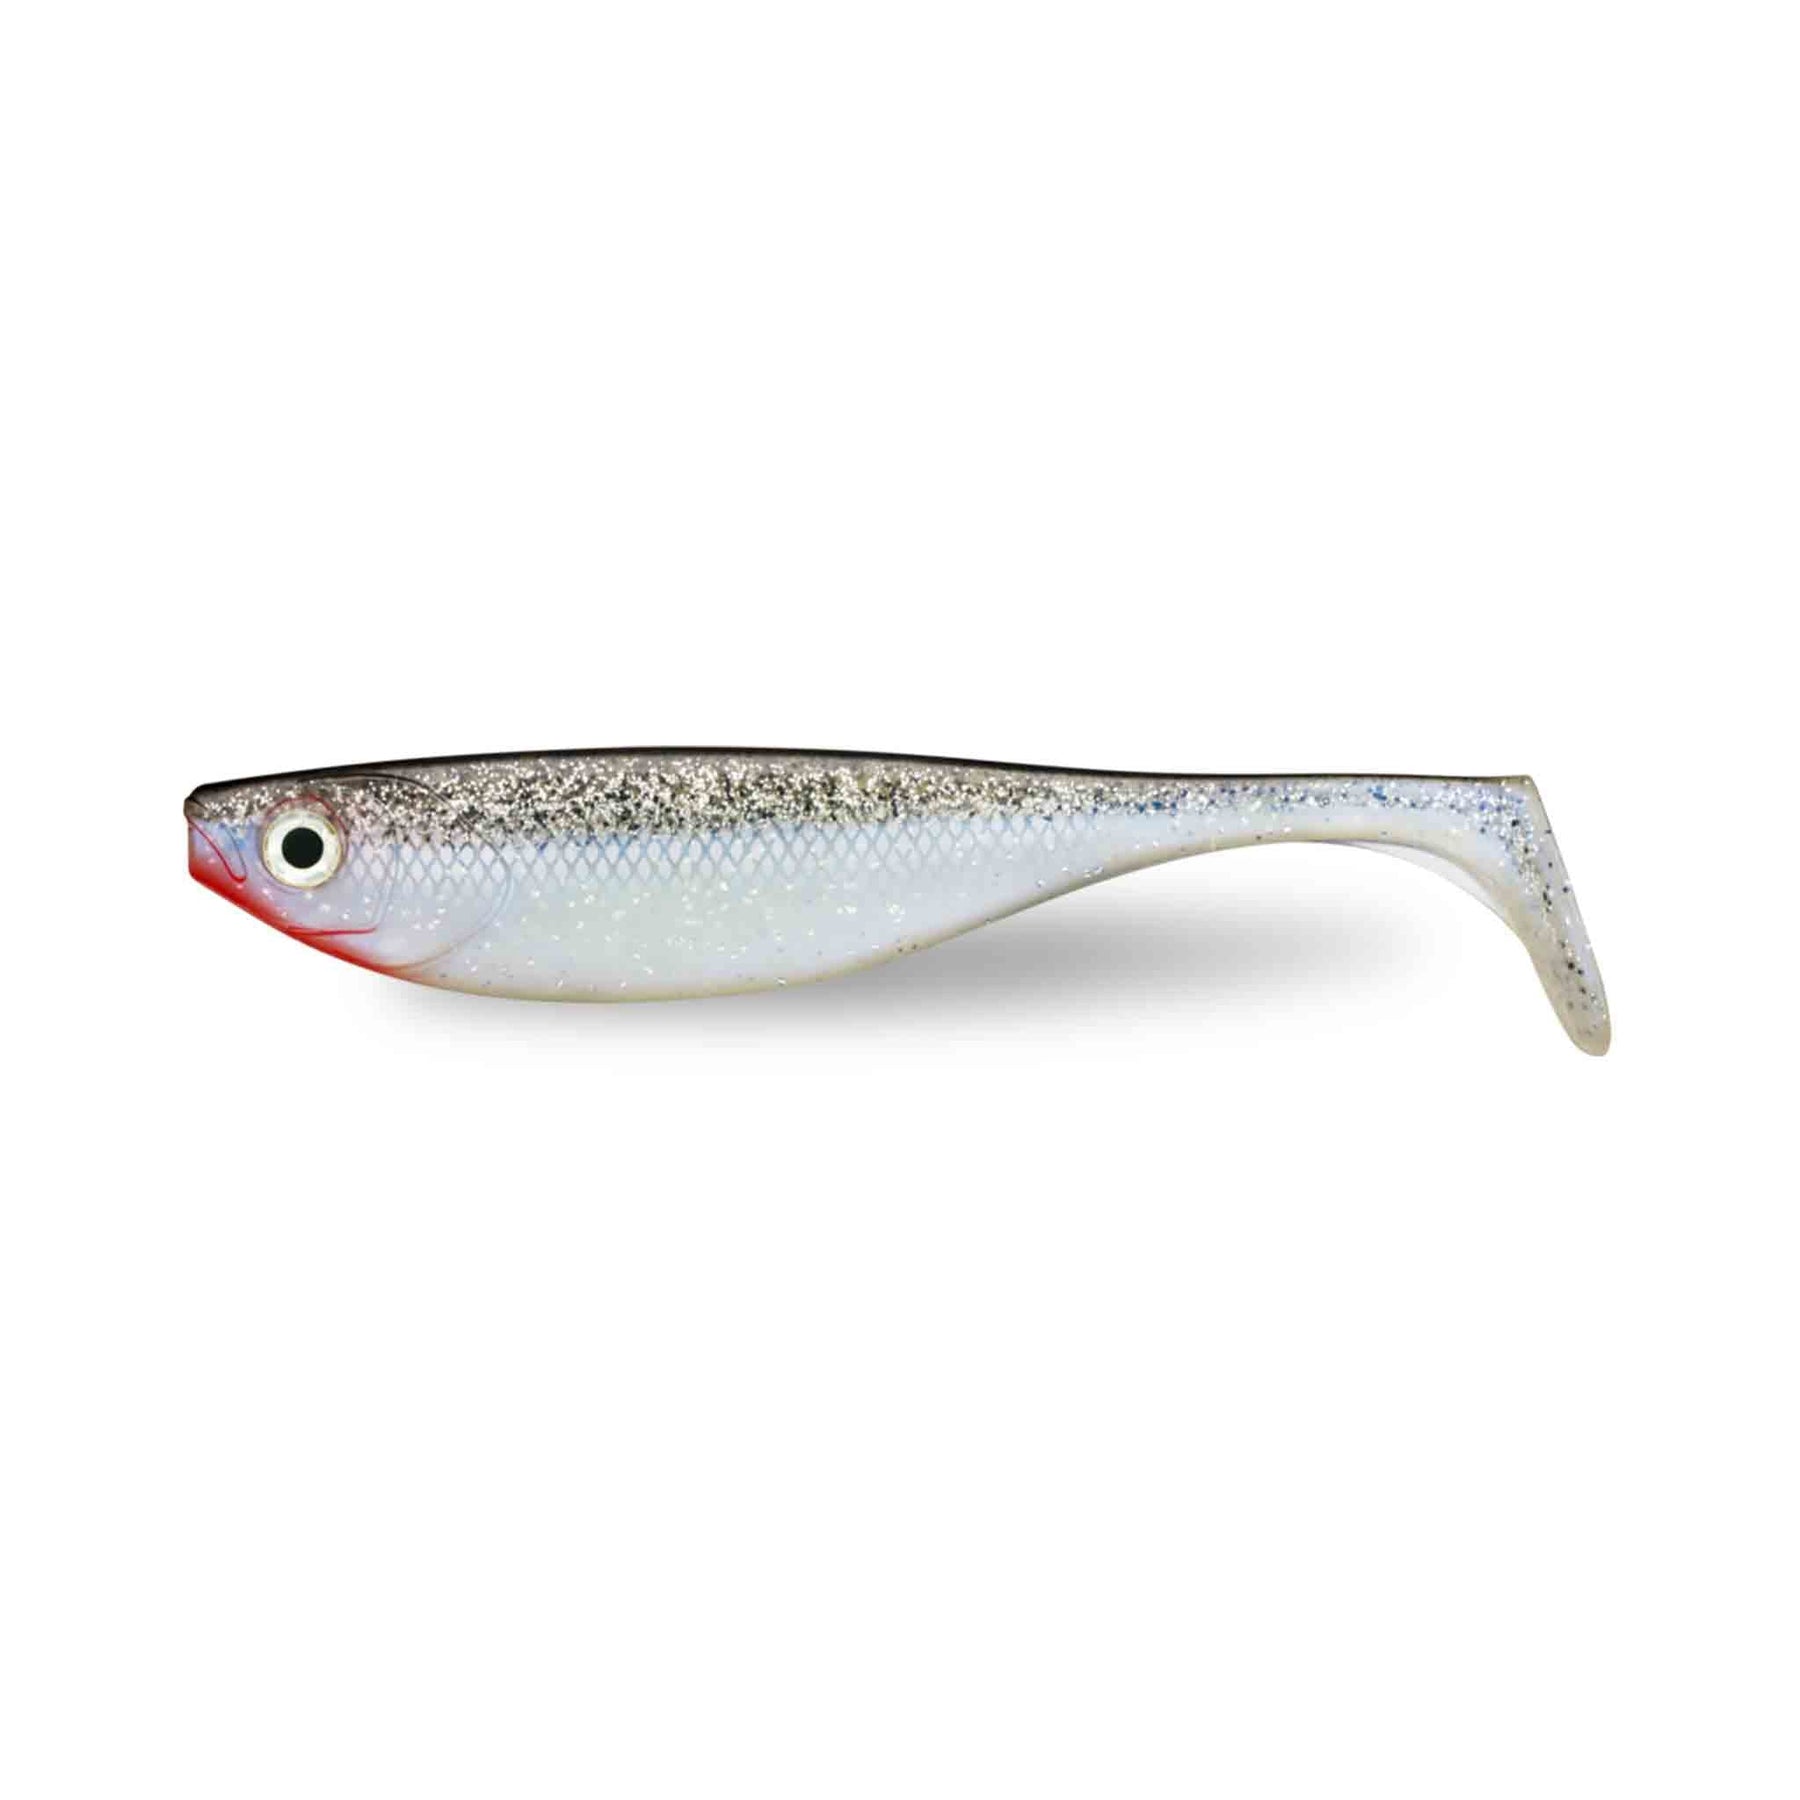 View of Swimbaits Storm Boom Shad 9" Swimbait Roach available at EZOKO Pike and Musky Shop